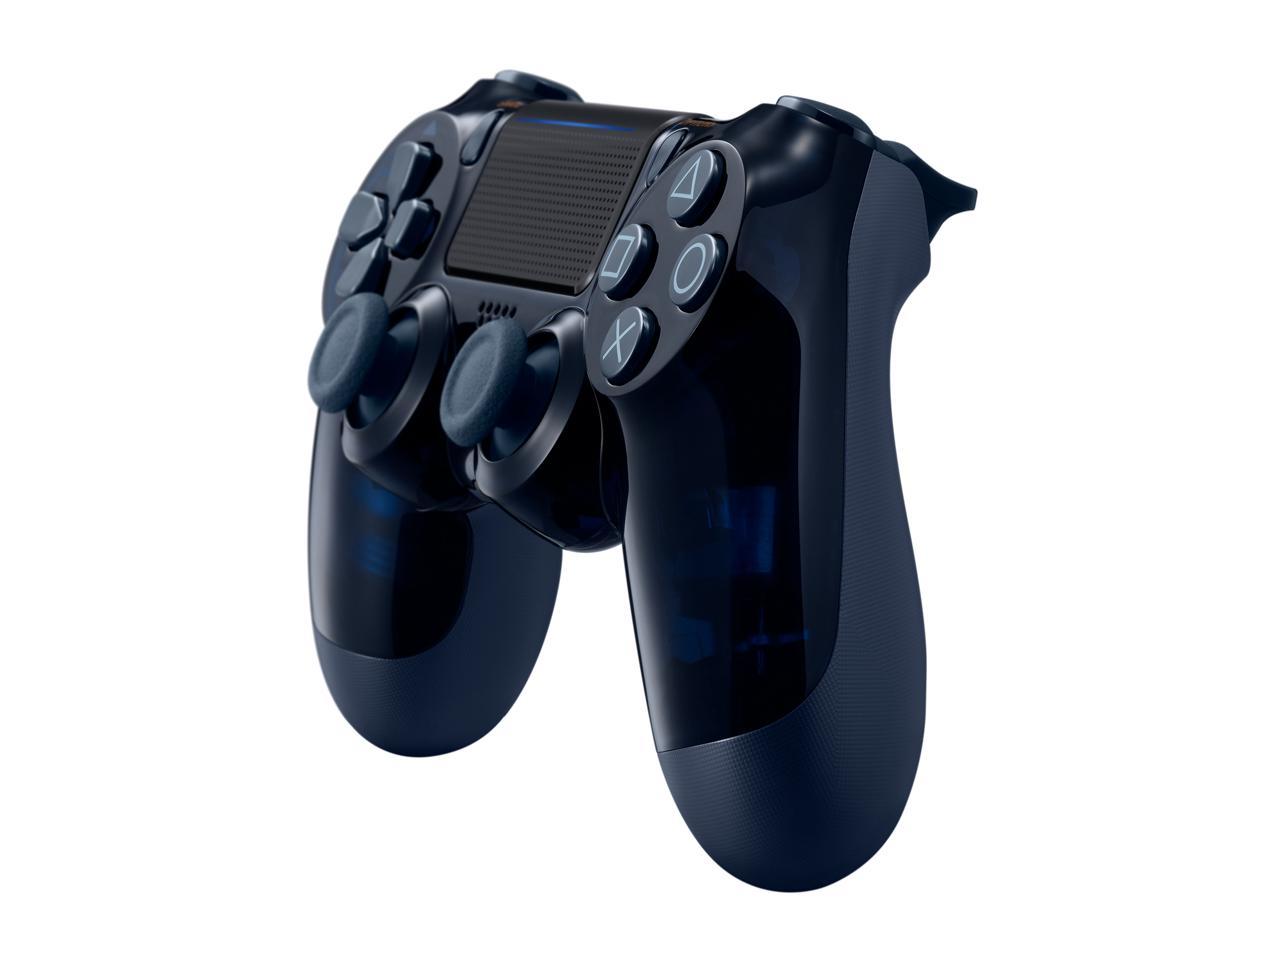 500 limited edition ps4 controller